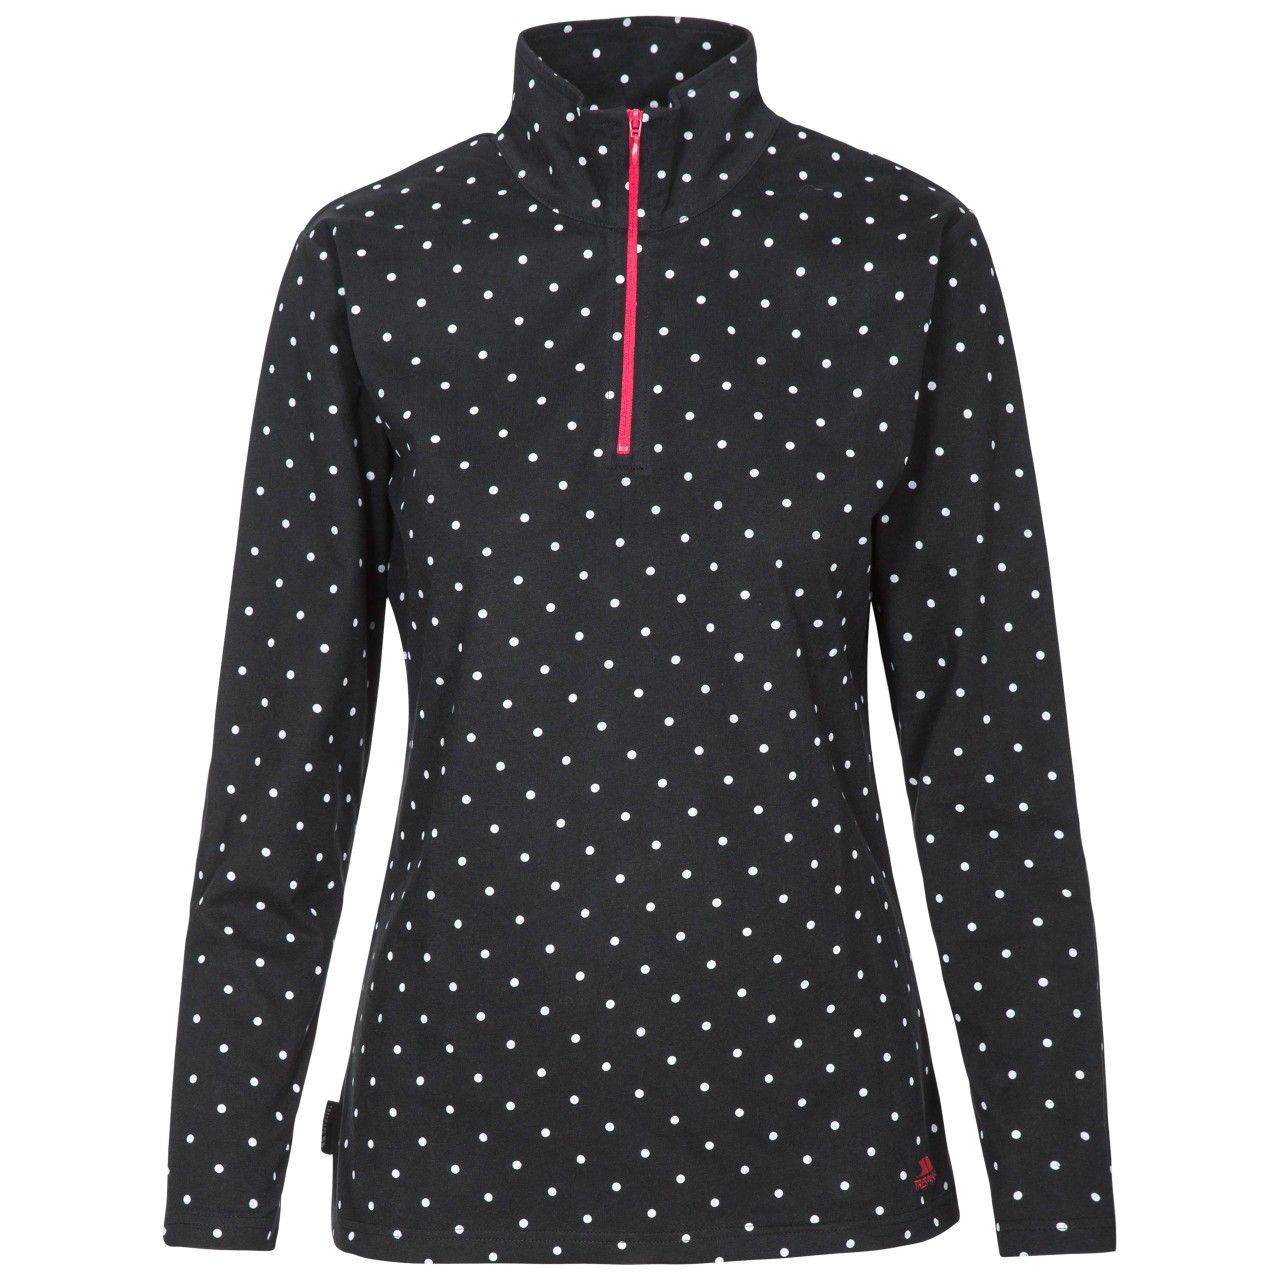 Zip Neck. Long Sleeve. All Over Print. Contrast Zip & Embroidery. Material: 60% Cotton 40% Polyester. Trespass Womens Chest Sizing (approx): XS/8 - 32in/81cm, S/10 - 34in/86cm, M/12 - 36in/91.4cm, L/14 - 38in/96.5cm, XL/16 - 40in/101.5cm, XXL/18 - 42in/106.5cm.